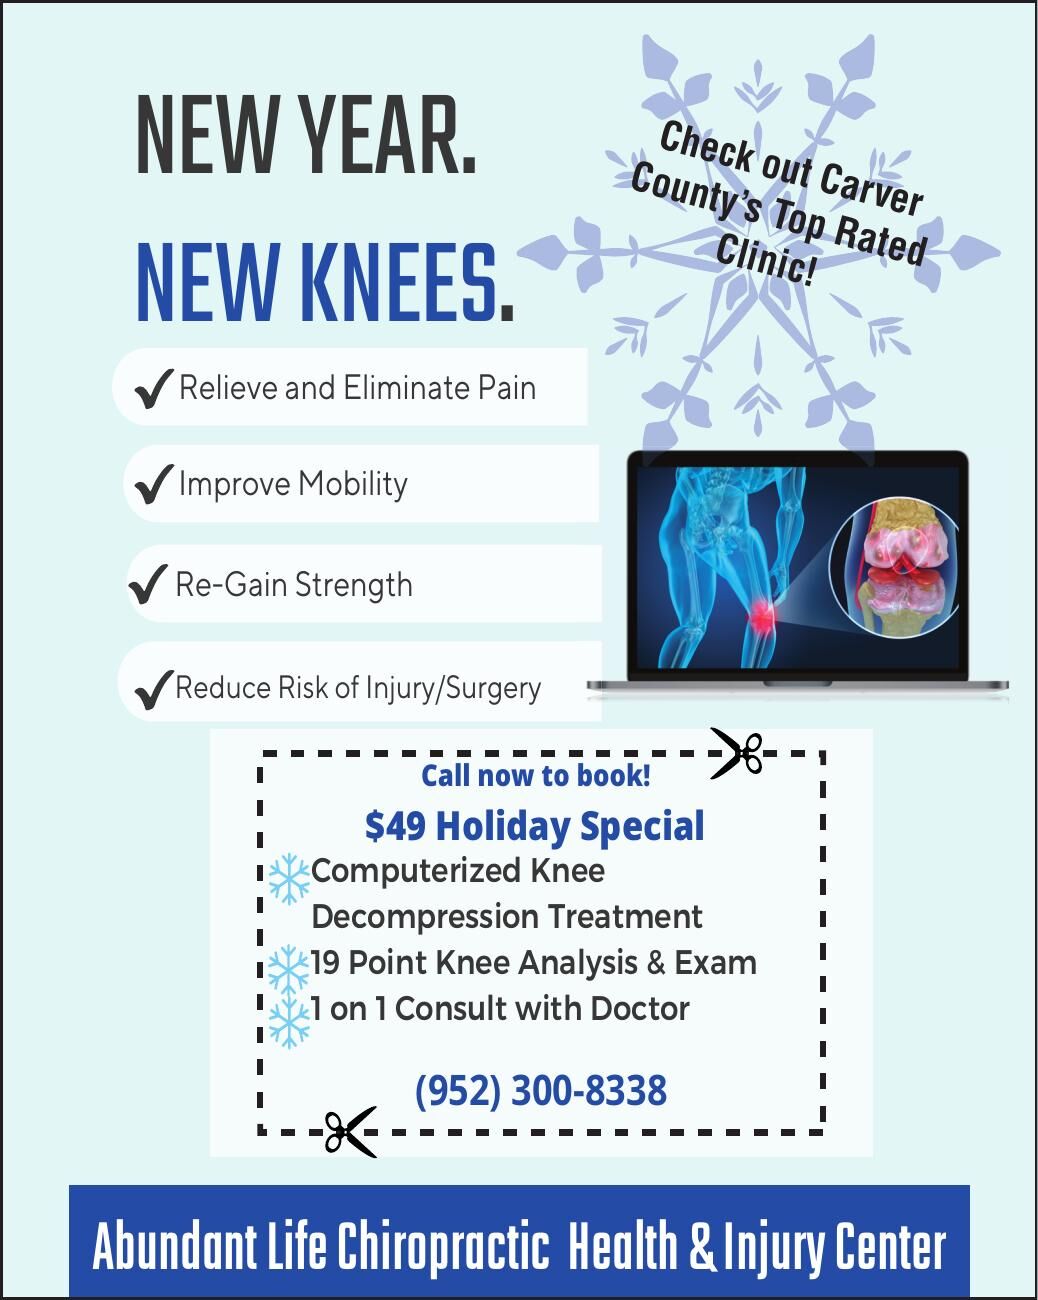 NEW YEAR. NEW KNEES. Chec k Coun out